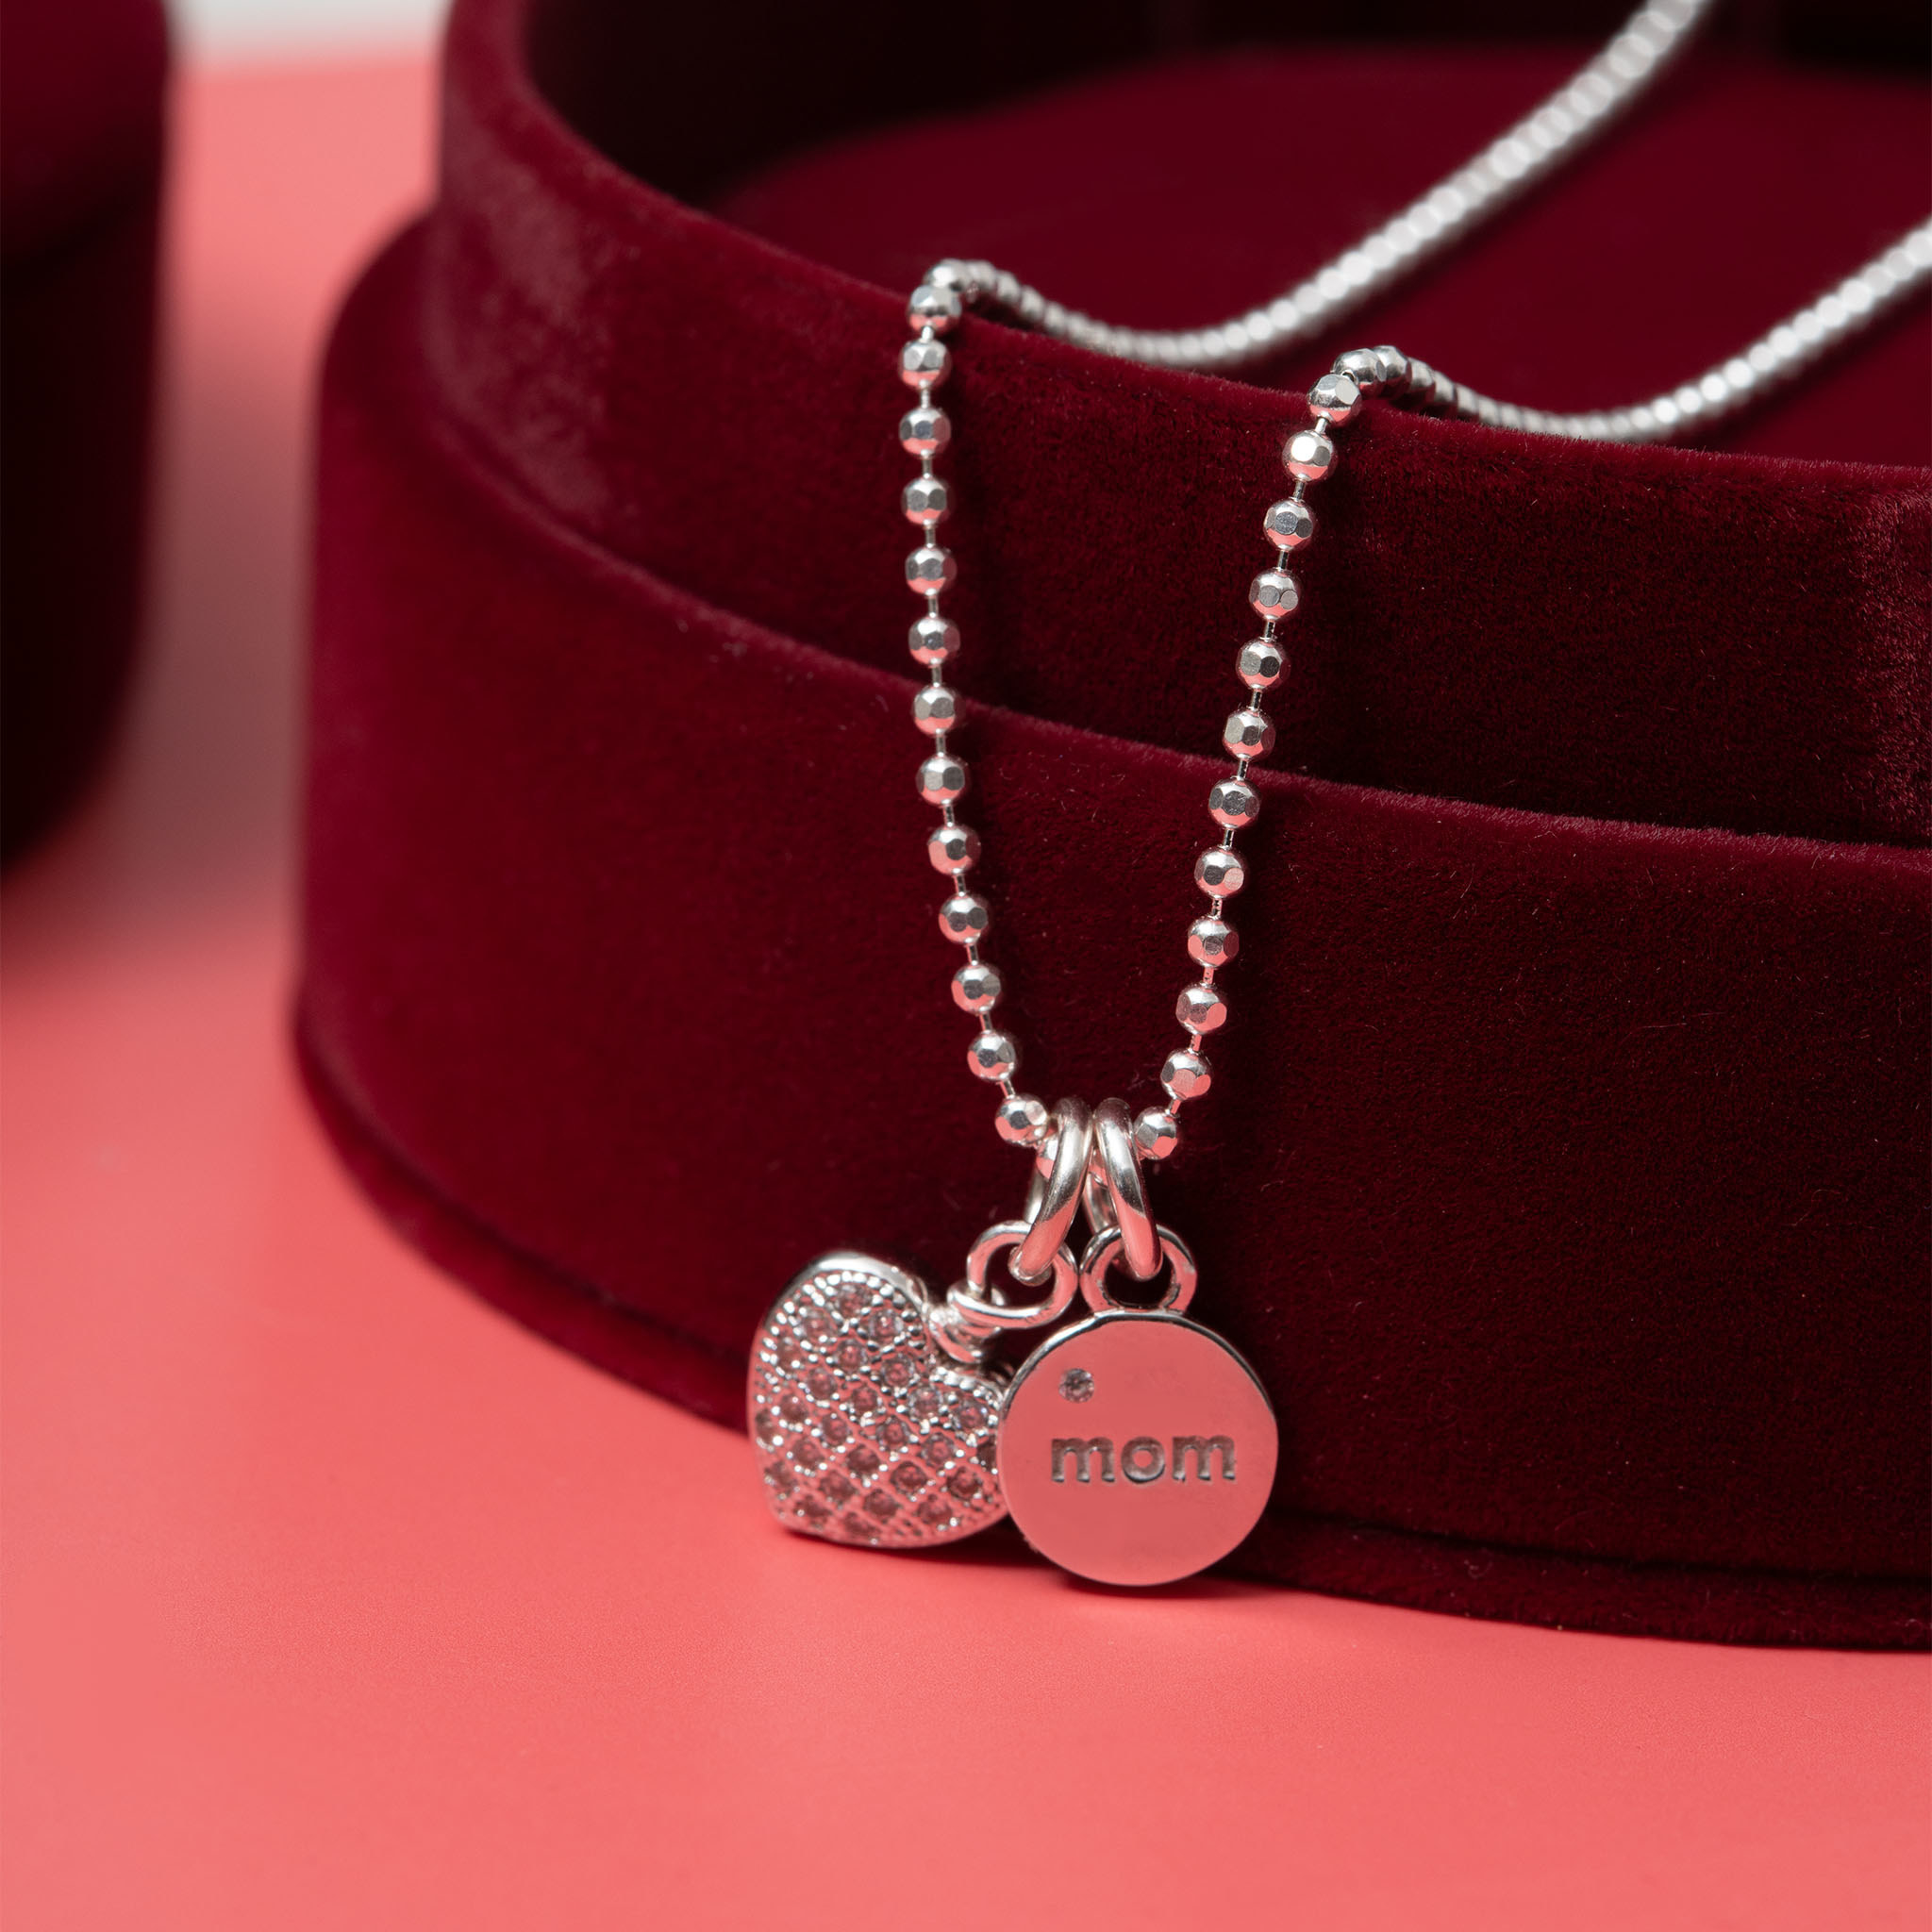 a necklace with mom and a heart charms